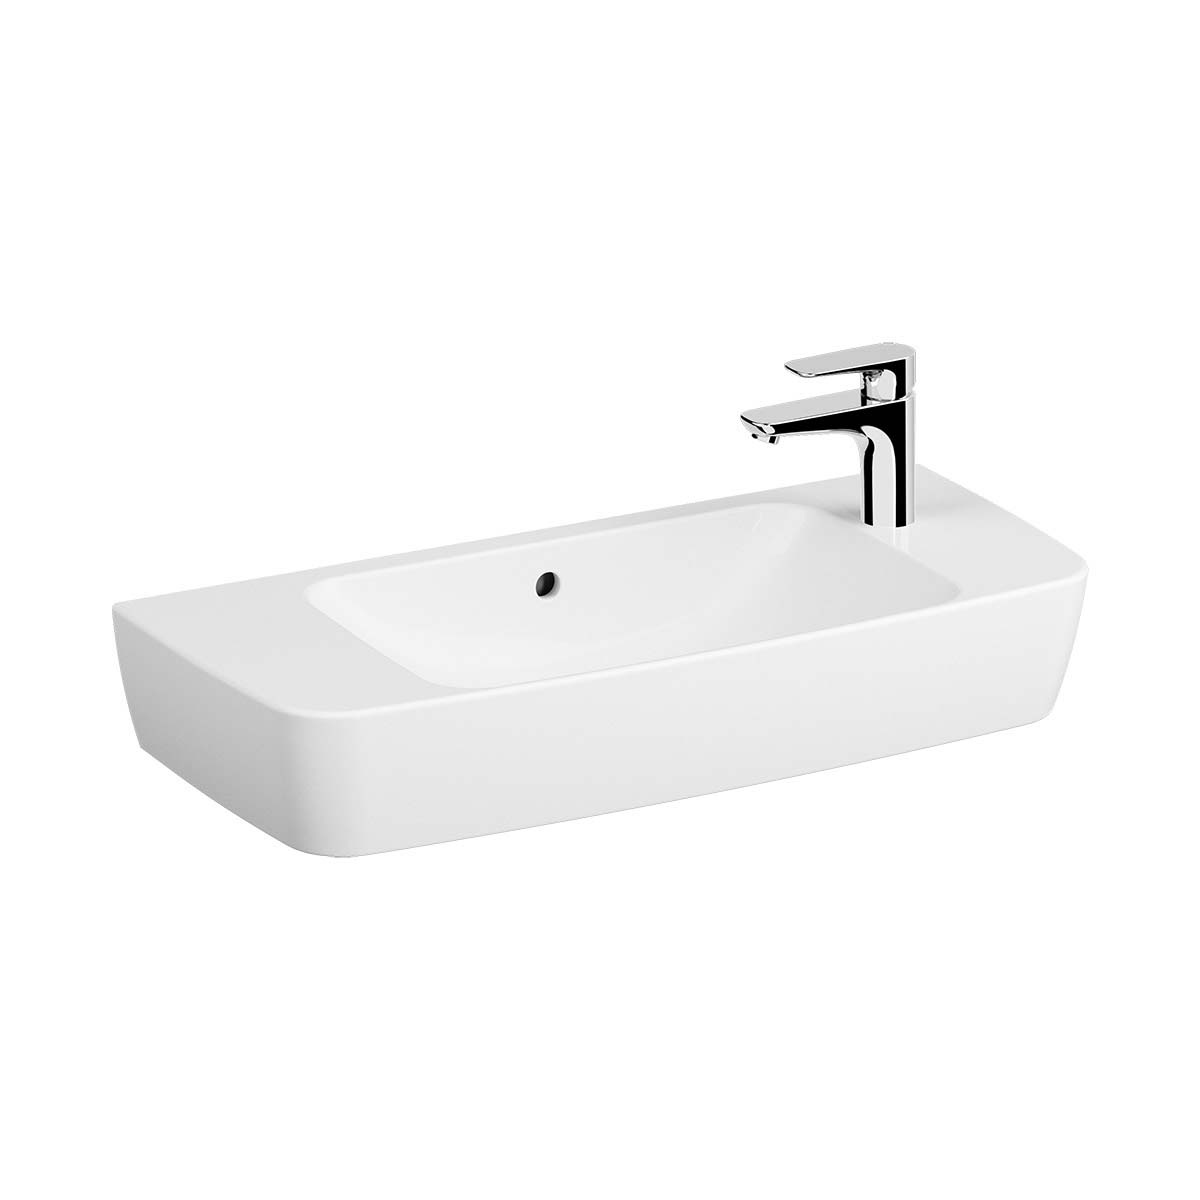 Compact Basin, One Tap Hole Right, Overflow Hole, 80X35 cm, For Countertop Use